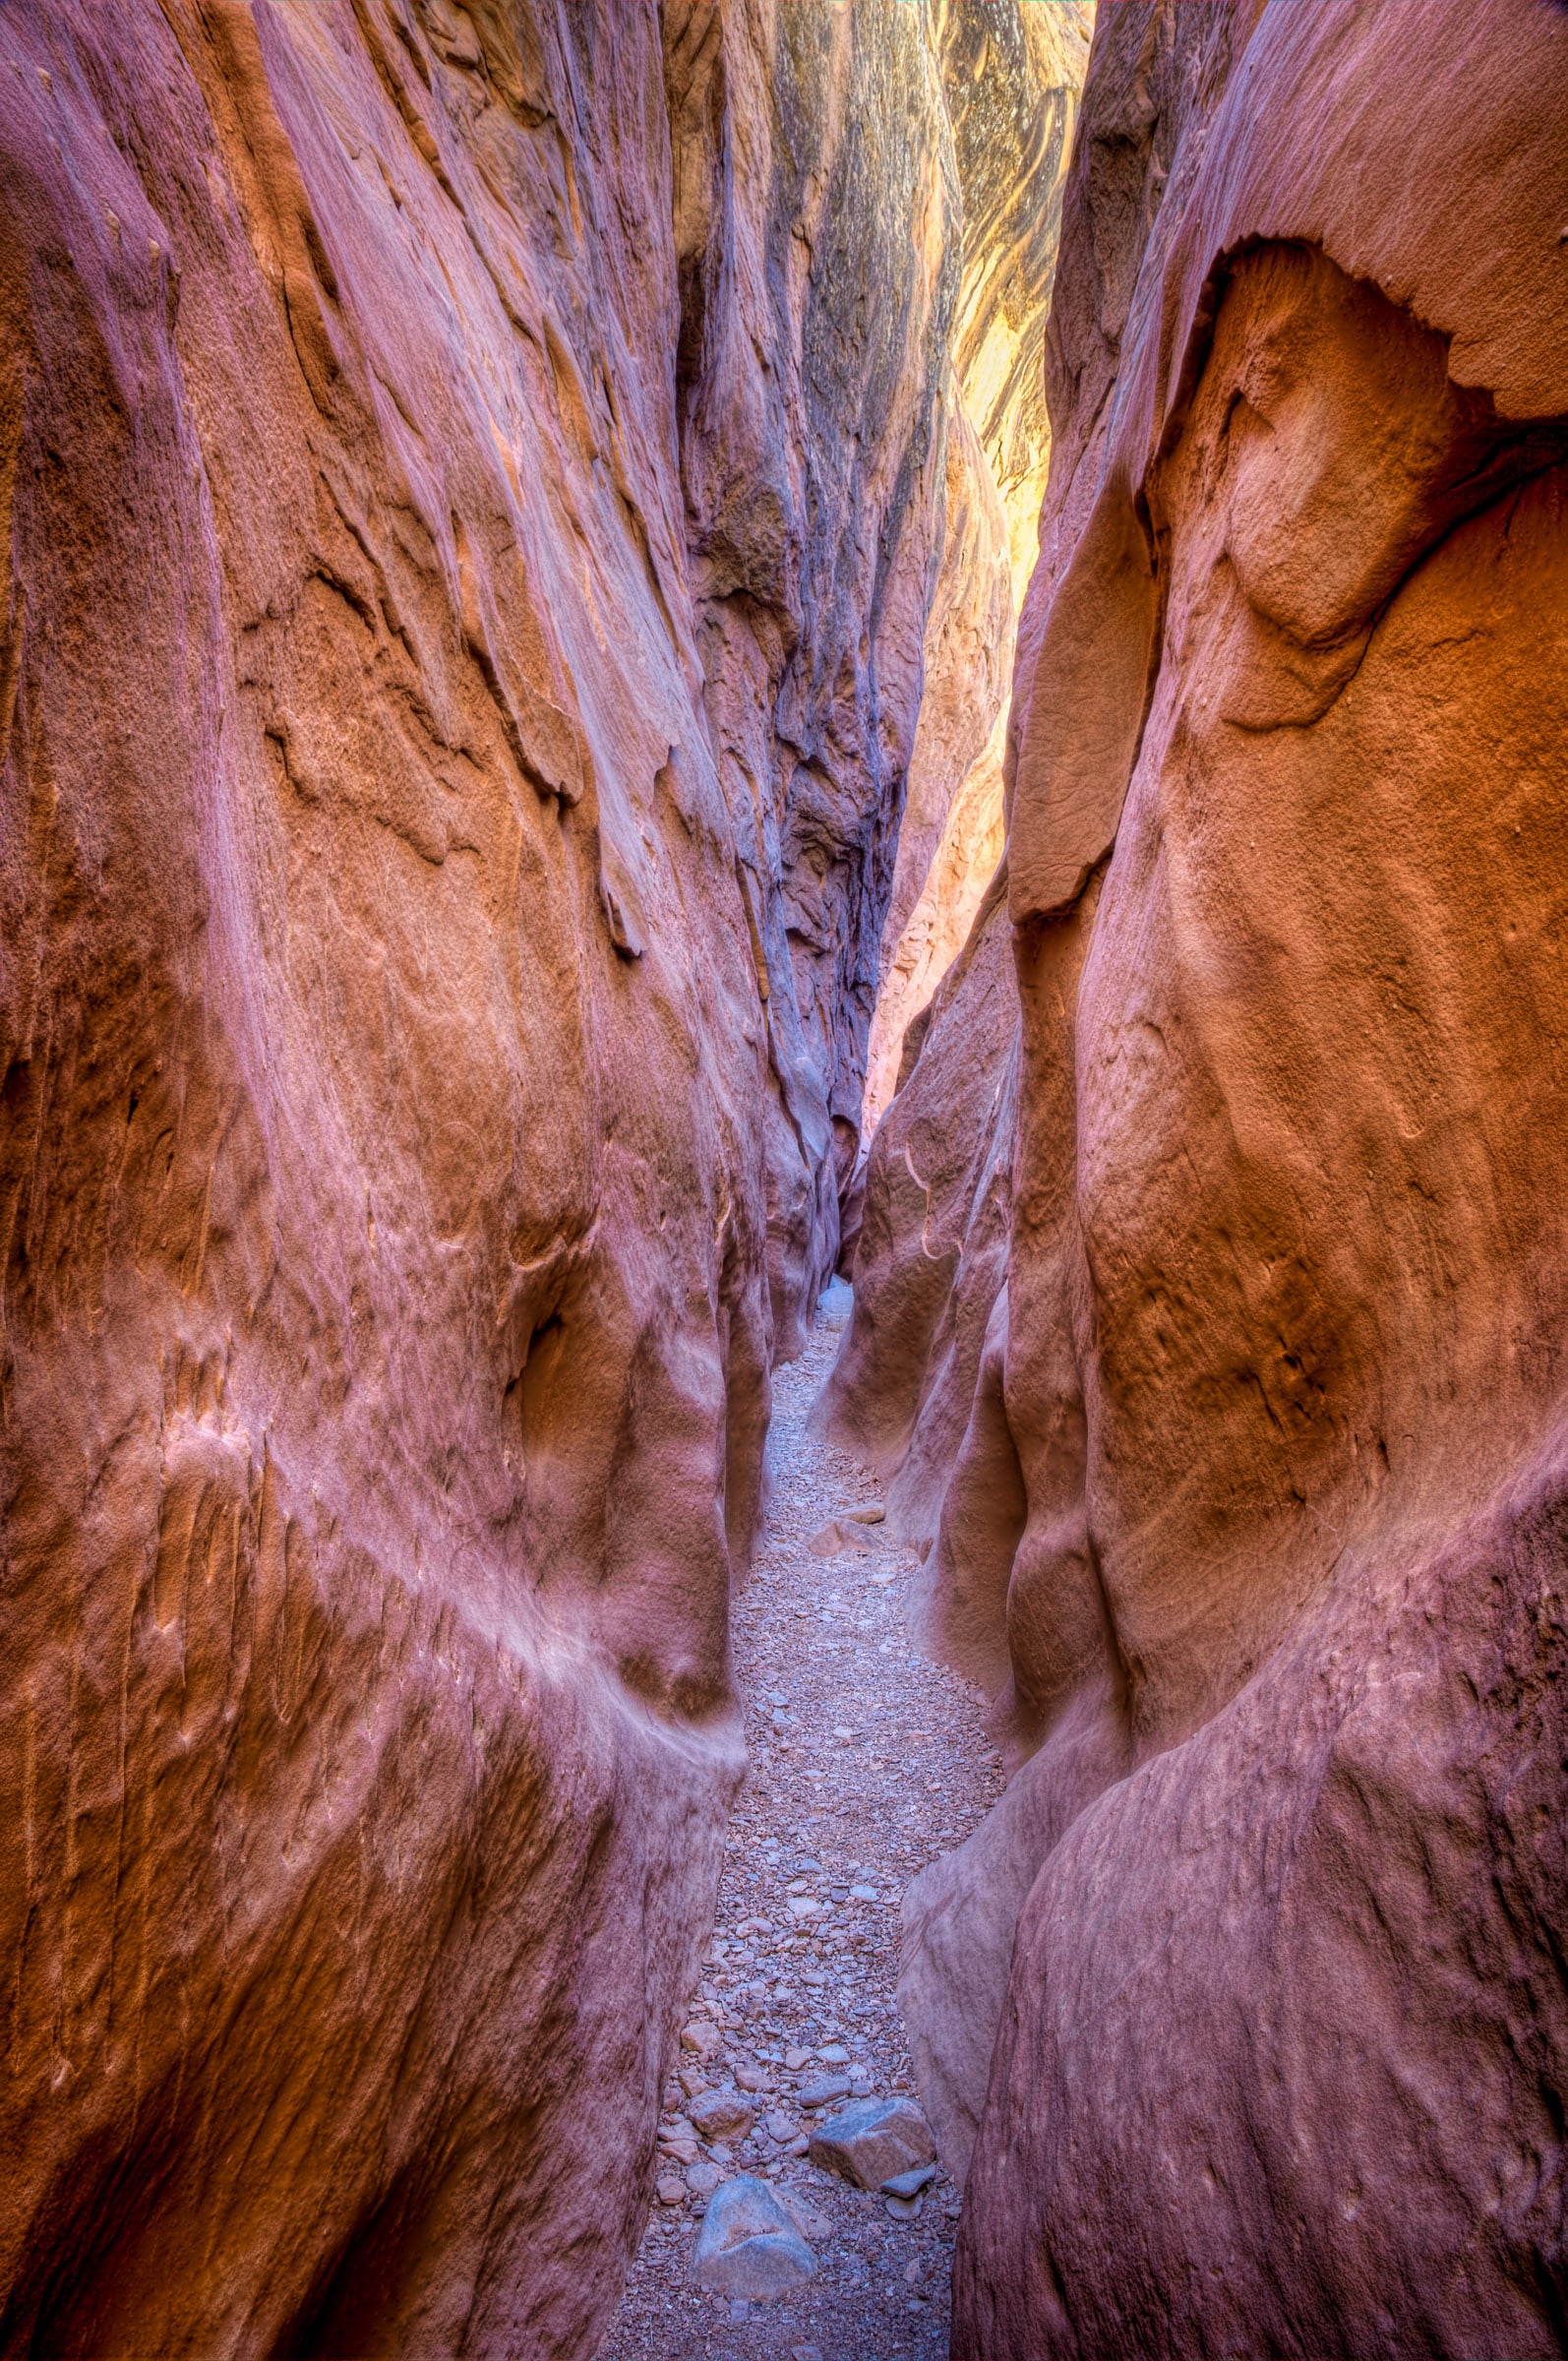 A view of the path through Bell Canyon, a slot canyon off Wild Horse Road near Goblin Valley State Park in Utah.